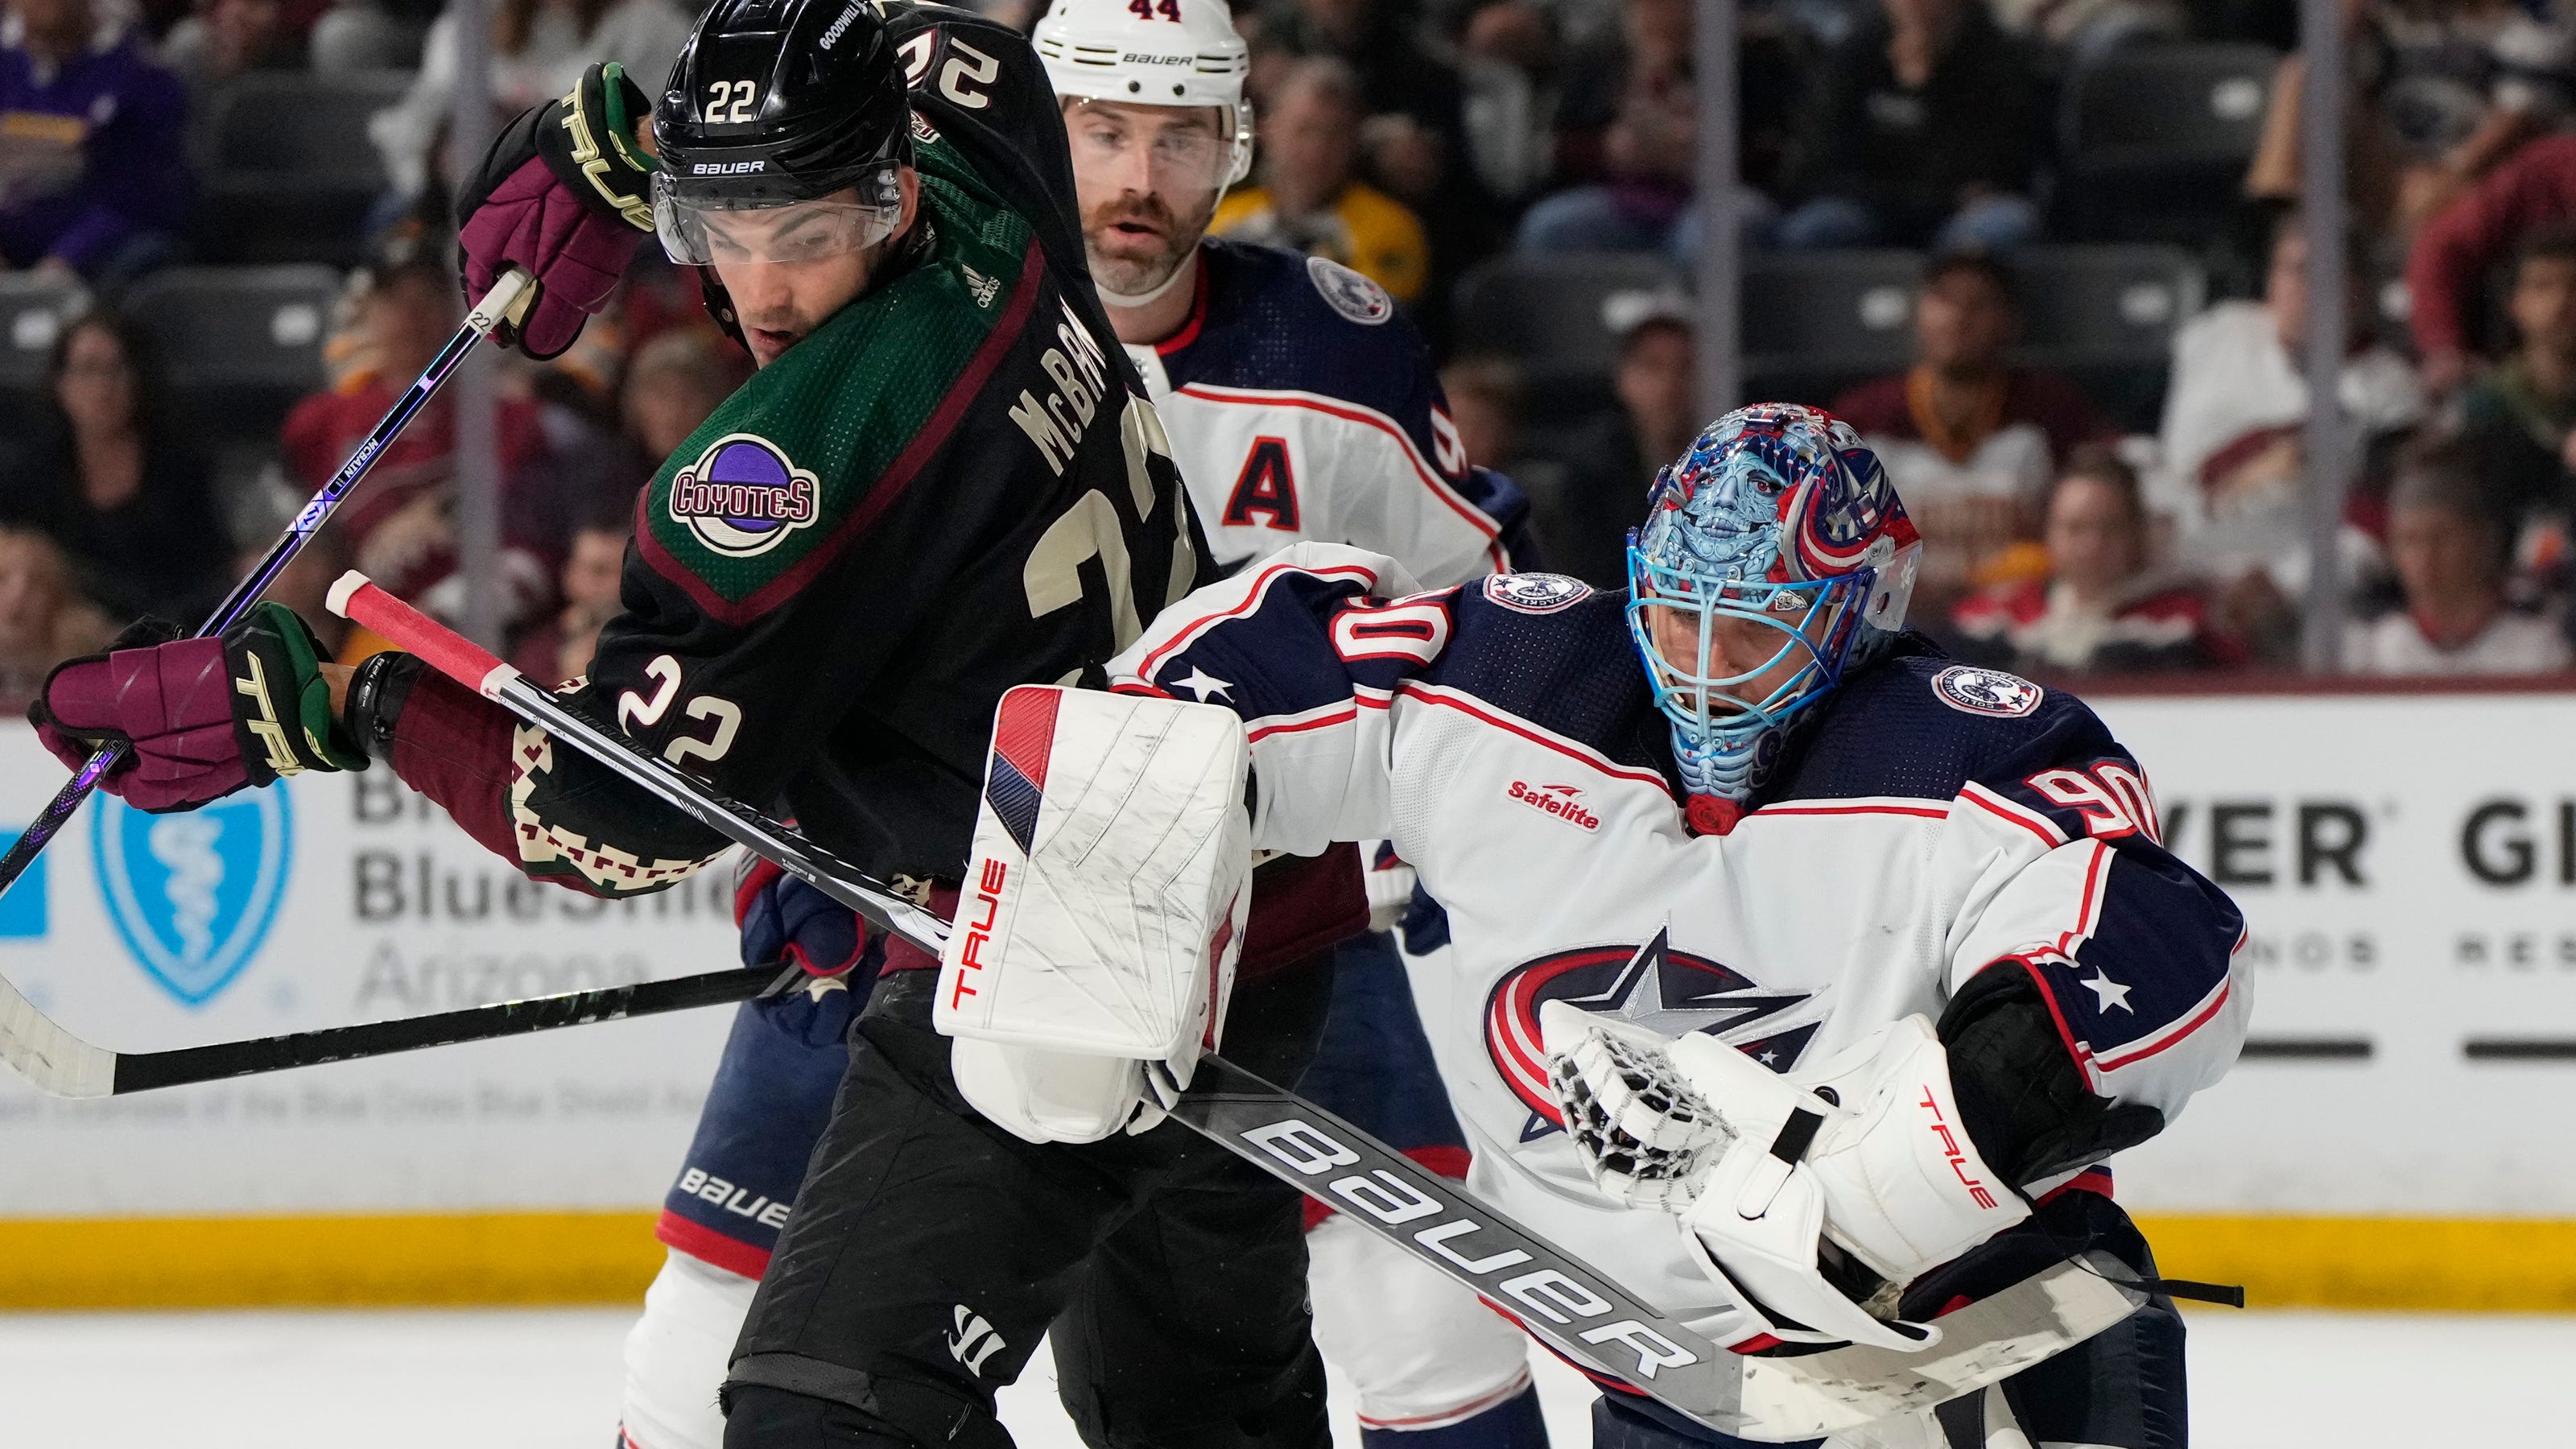  Columbus Blue Jackets tumble late in frustrating loss to Arizona Coyotes: 3 takeaways 